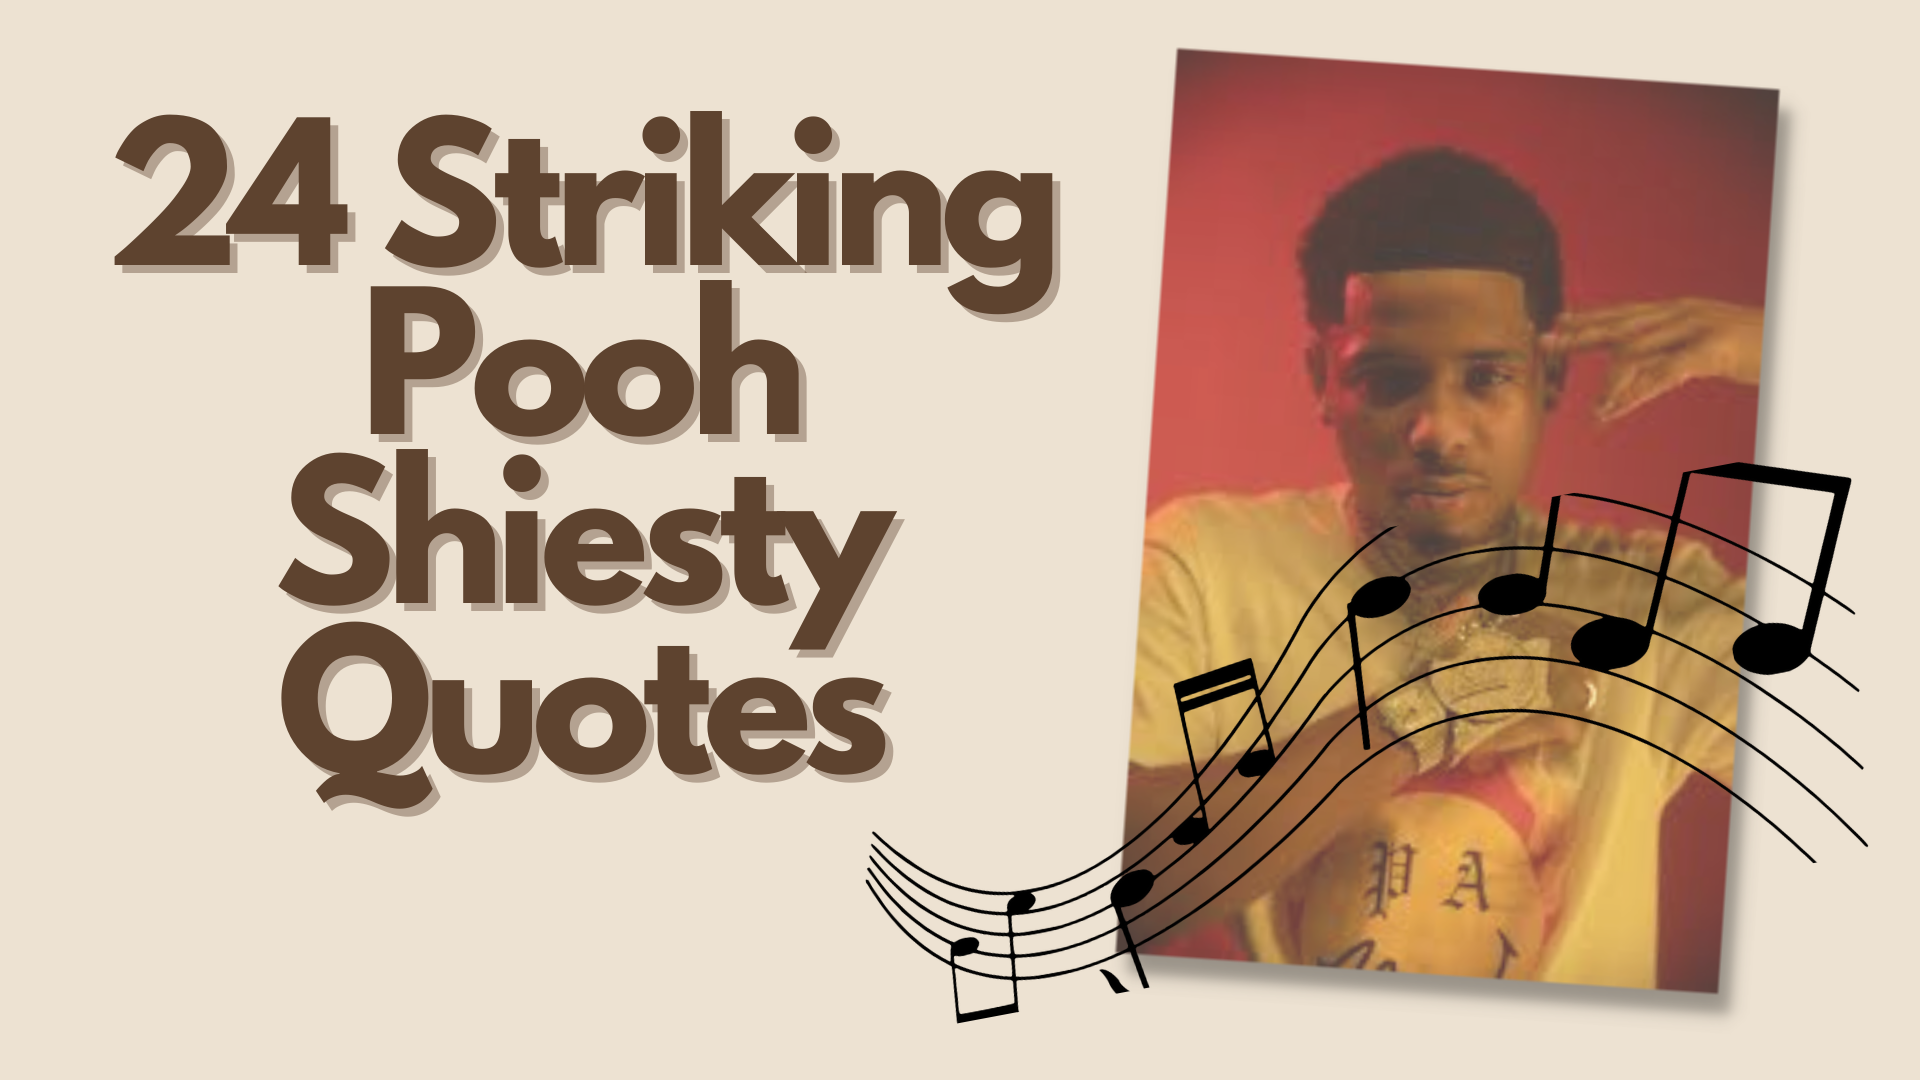 pooh shiesty quotes